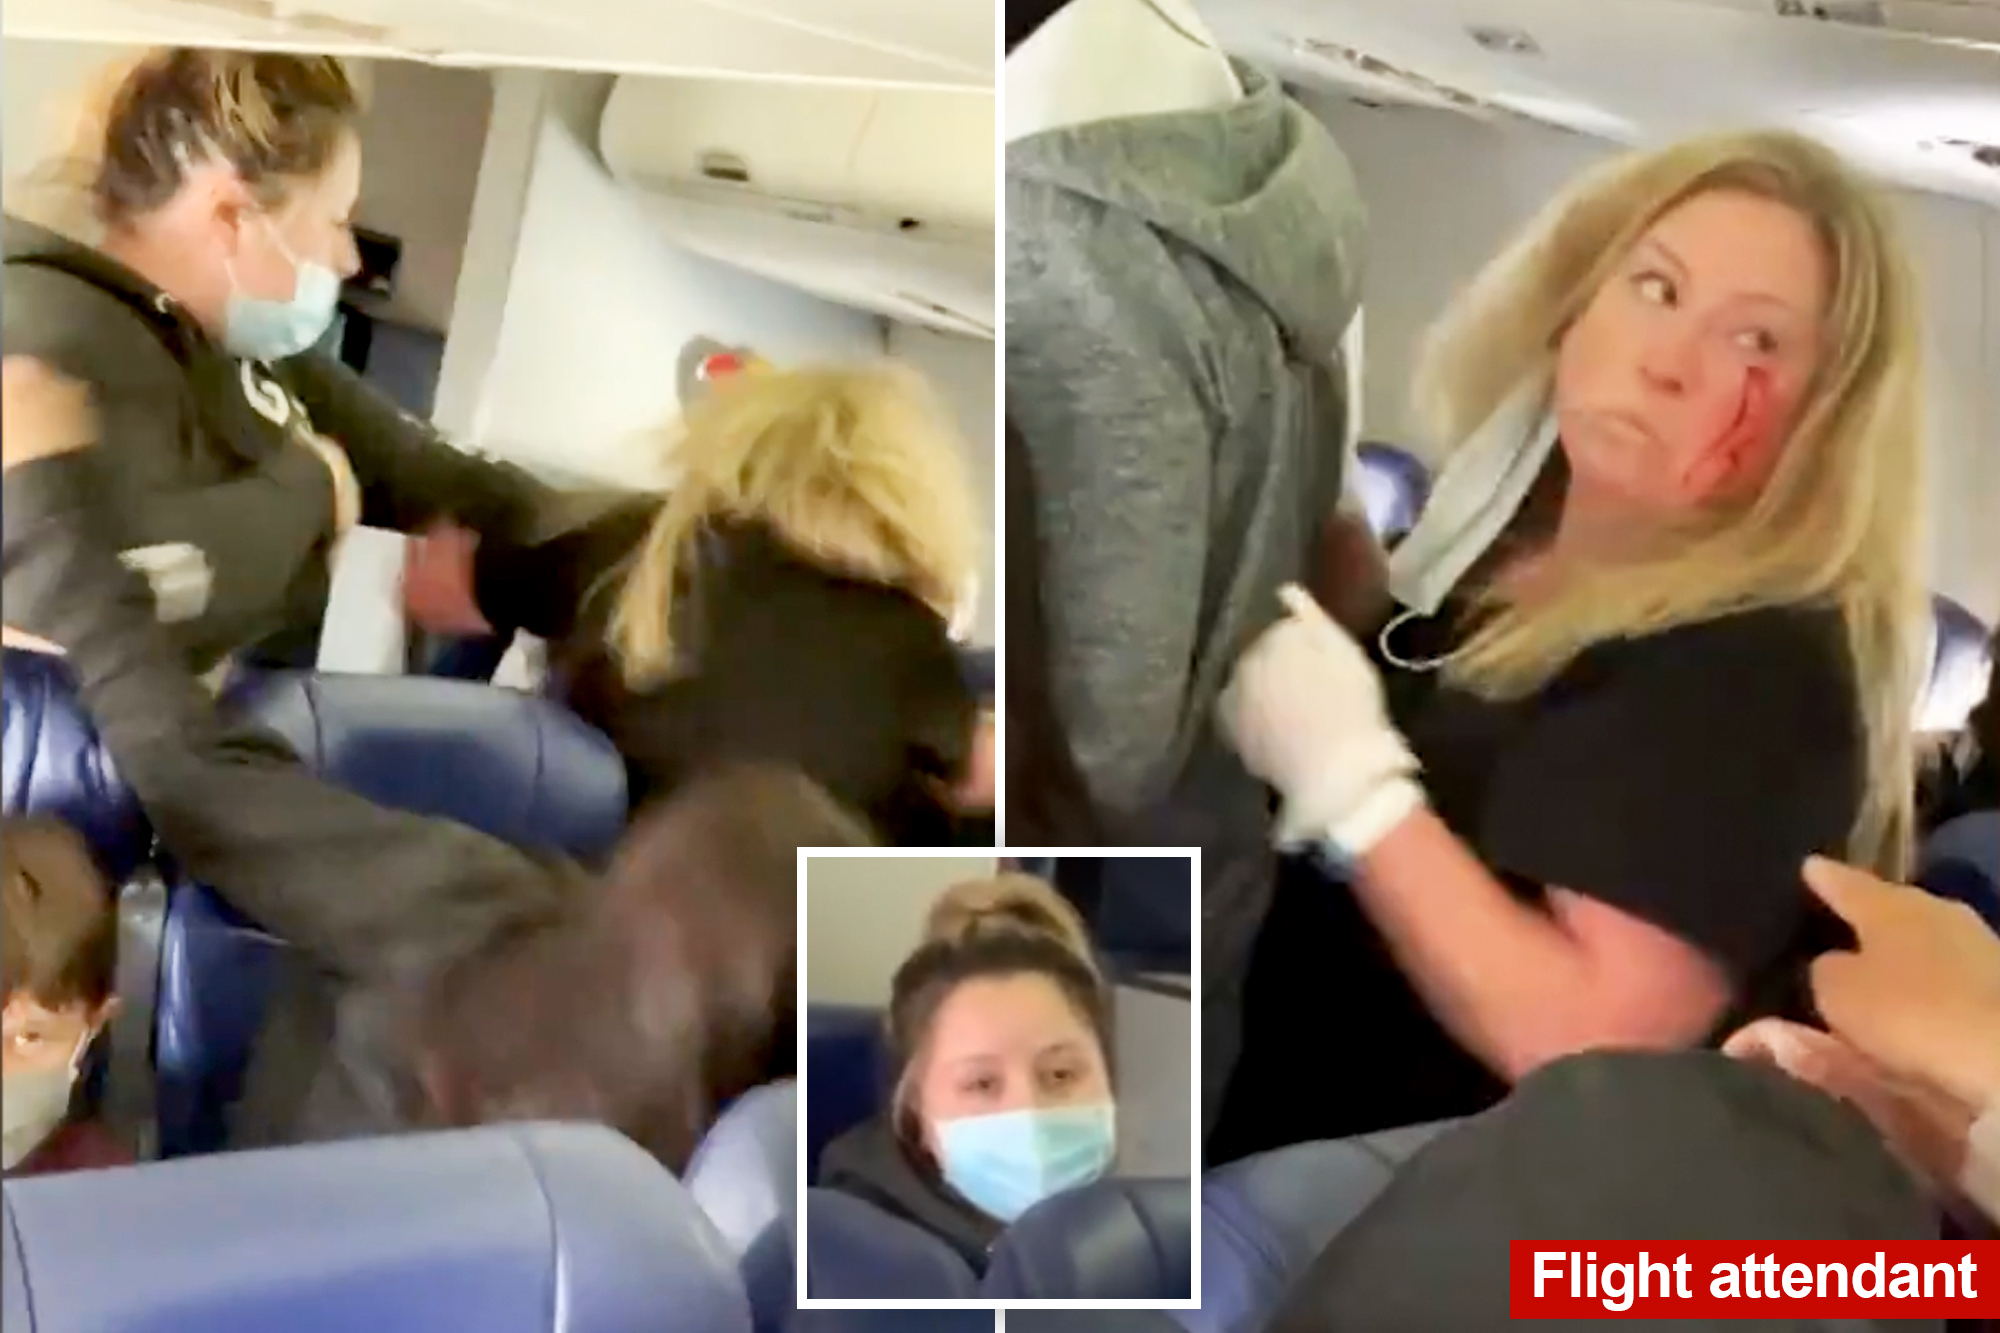 Breaking a flight attendant's tooth, an American female passenger received a prison sentence - Photo 2.